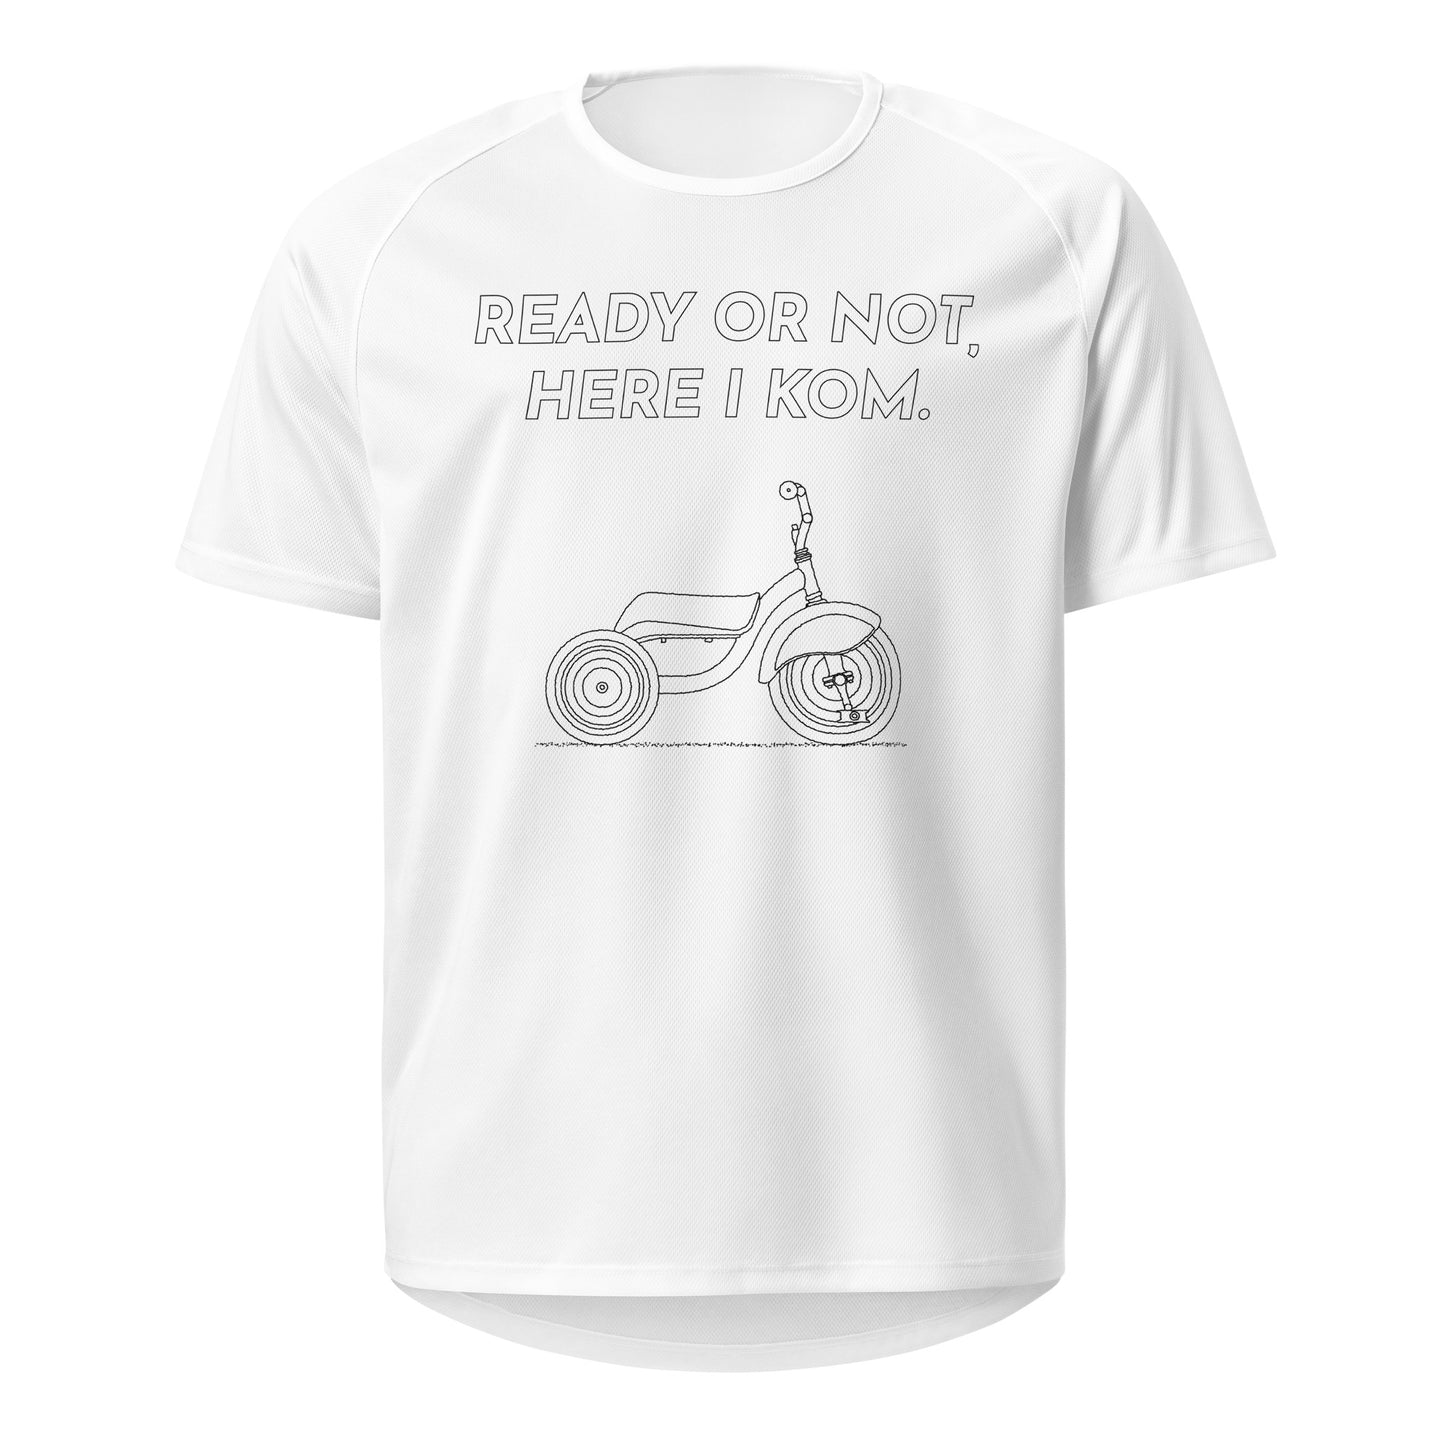 Ready Or Not, Here I KOM, Tricycle Sports Jersey Shirt for Cyclists